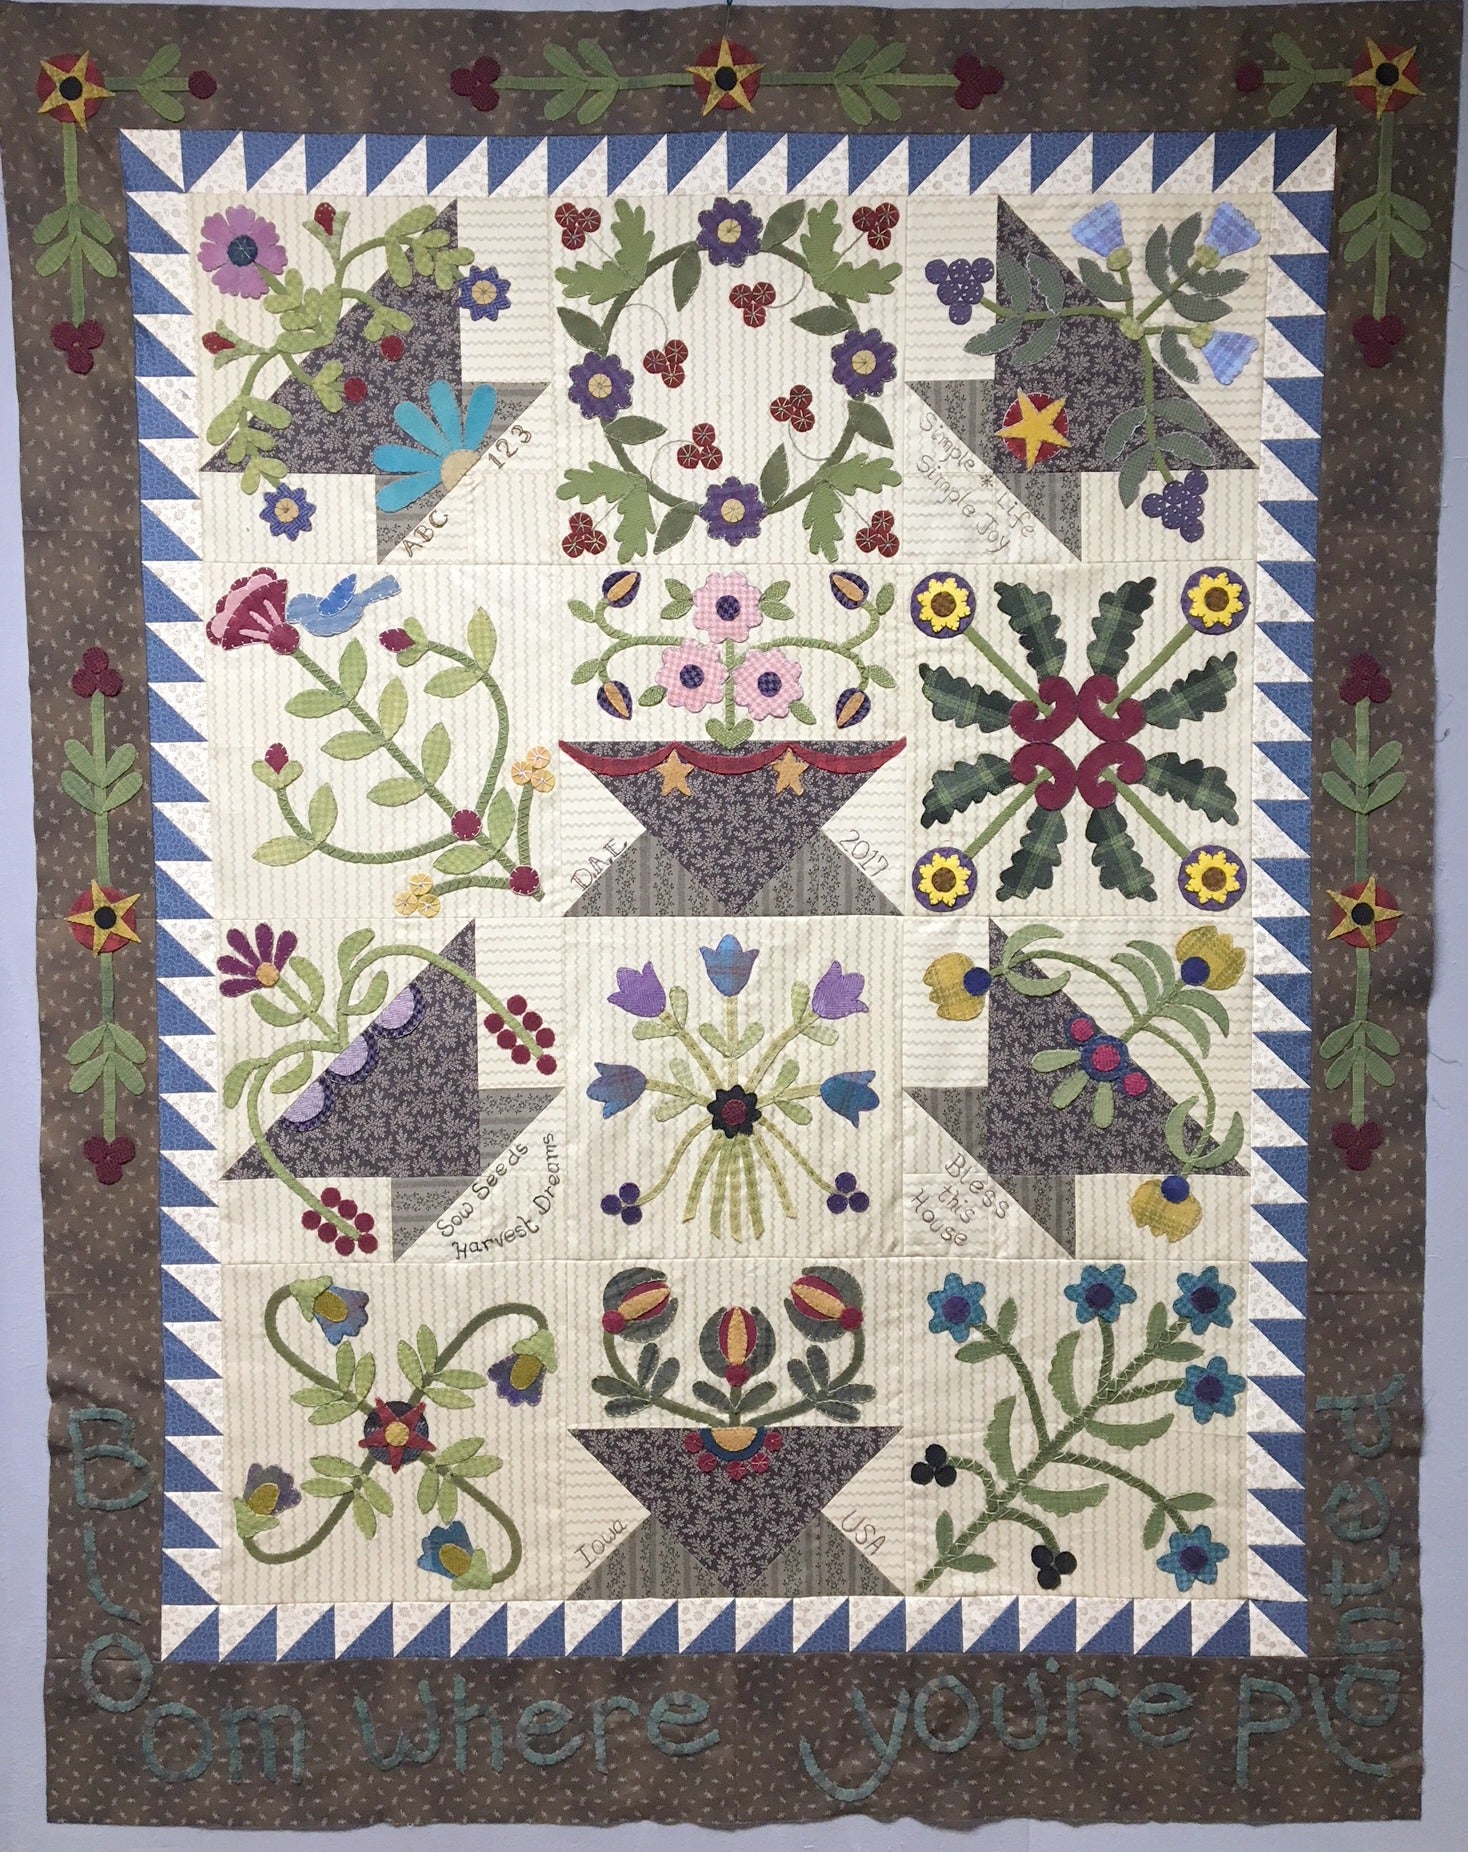 Snuggles Quilts Block of the month for 2017 wool applique blocks and embroidery